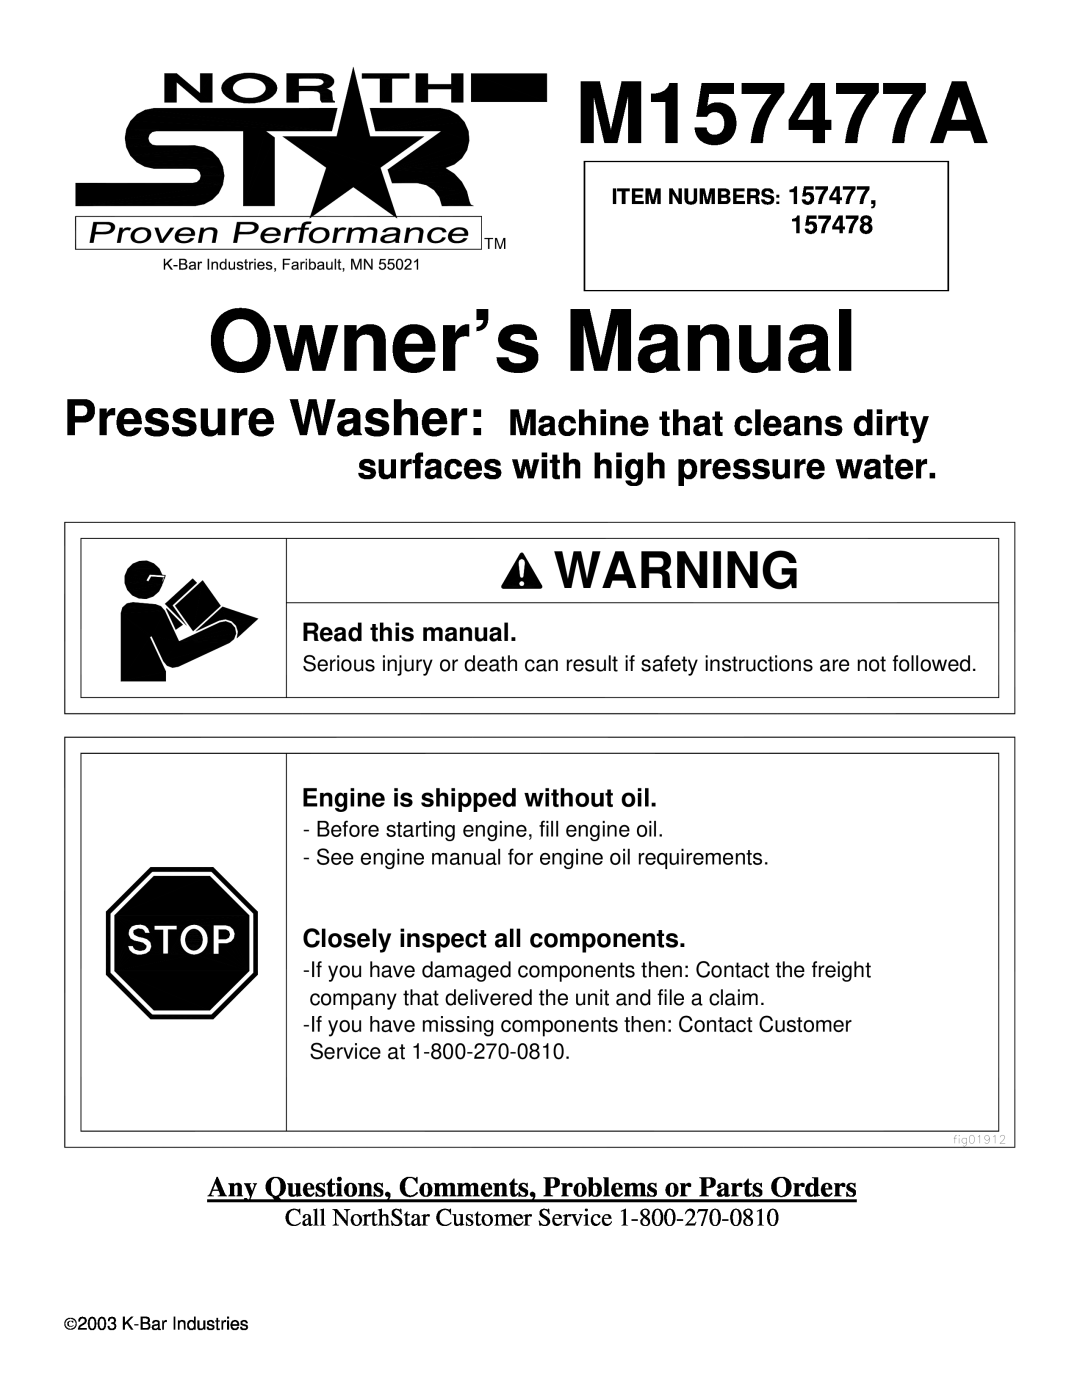 North Star M157477A owner manual Any Questions, Comments, Problems or Parts Orders, Read this manual, Item Numbers 